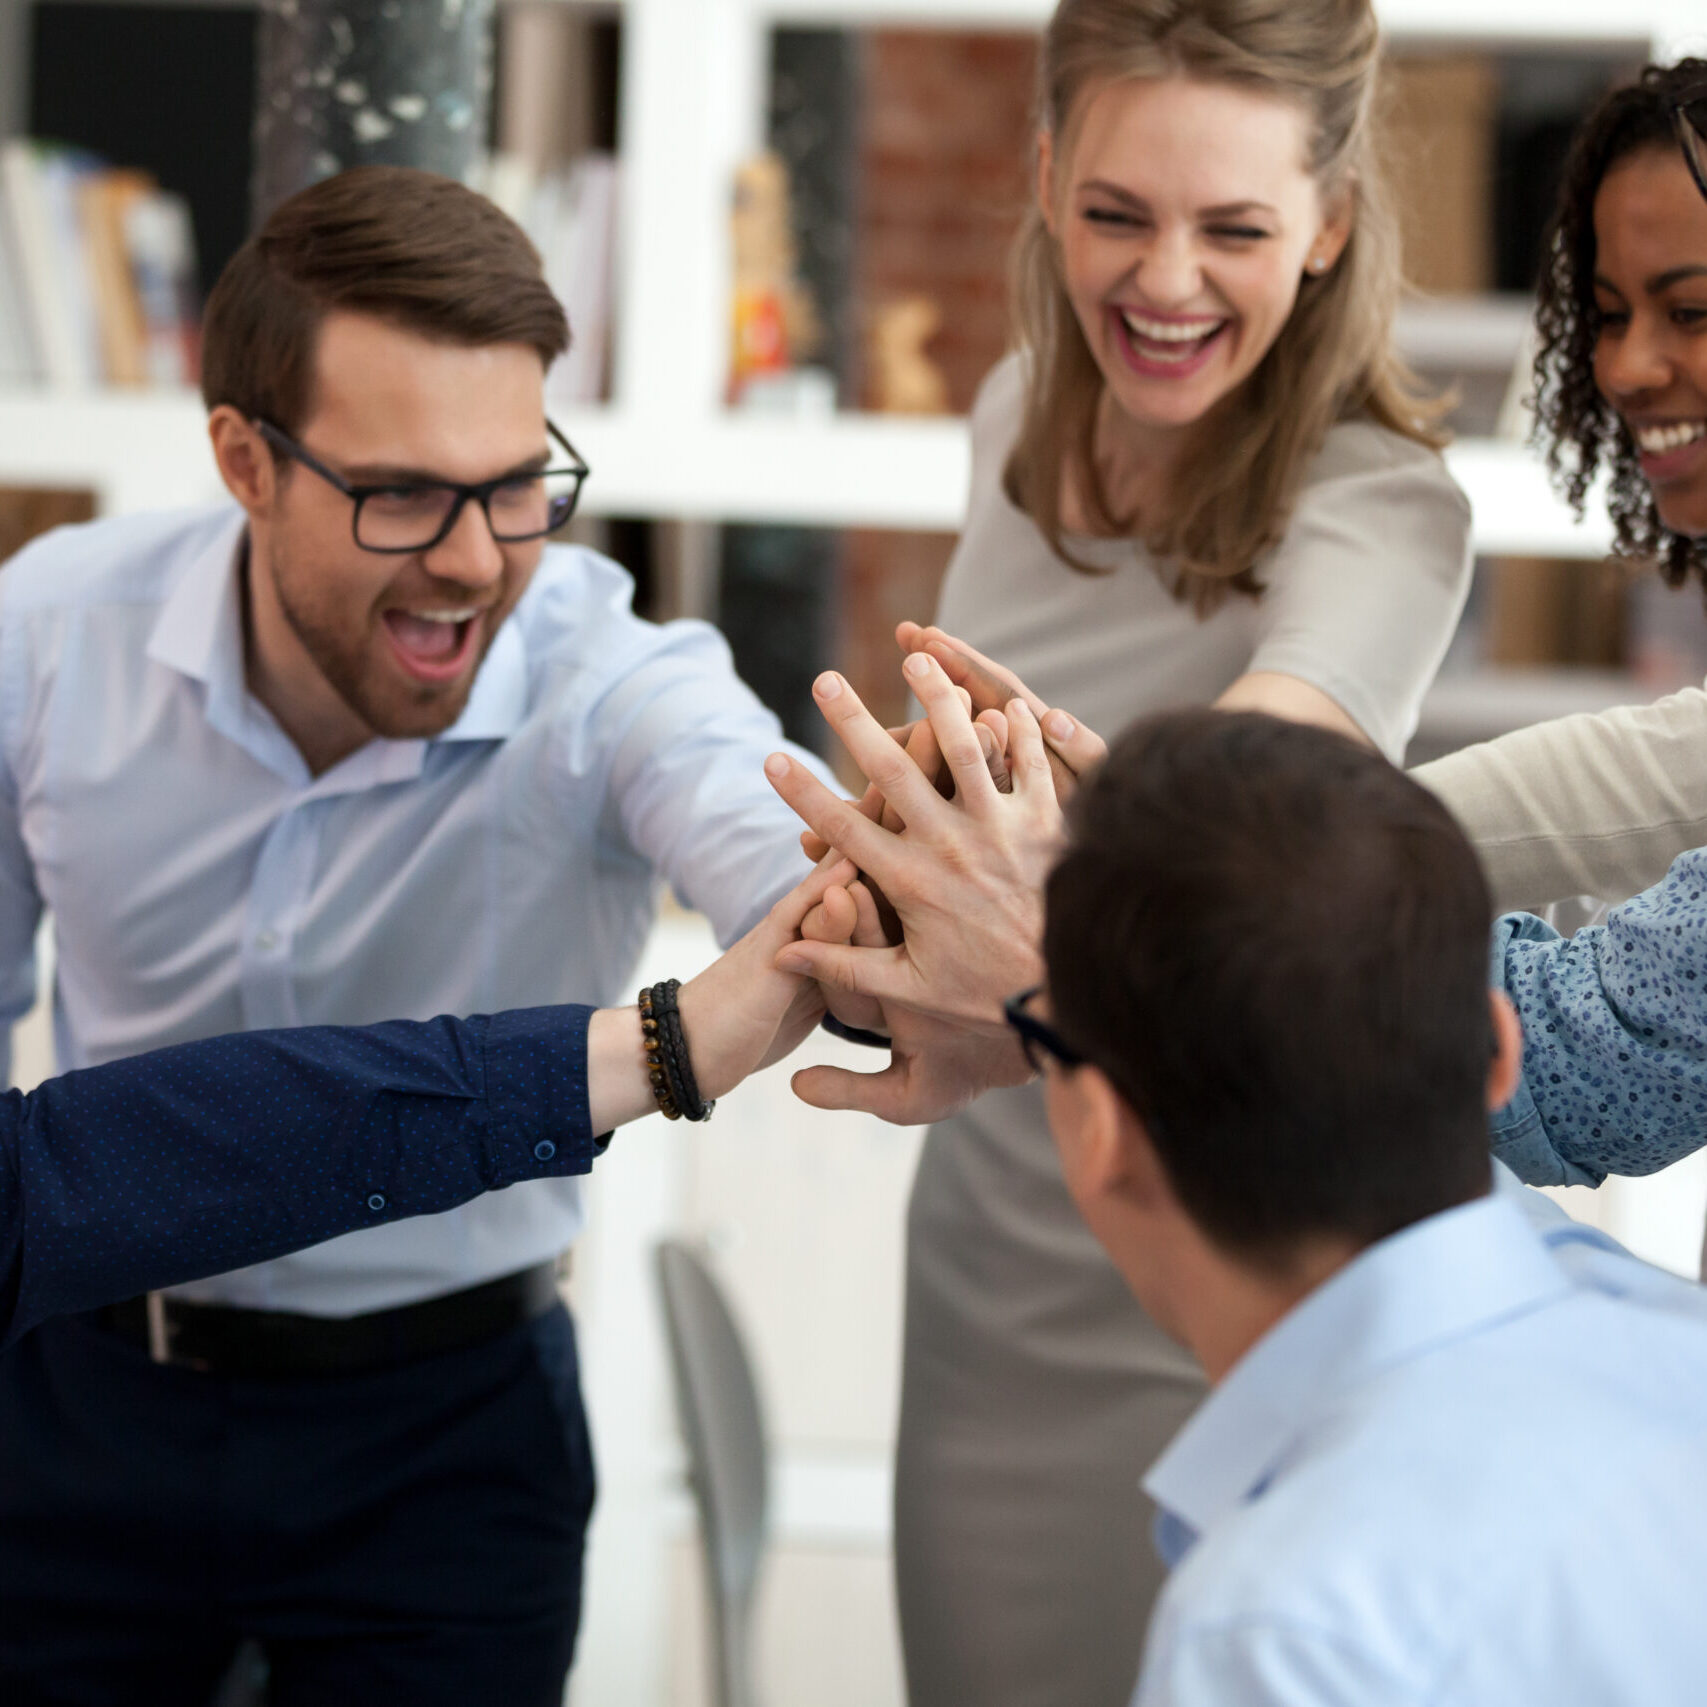 Excited motivated multi-ethnic team people give high five, happy diverse office employees executive group celebrate corporate success, sharing victory, engaged in unity support teambuilding concept